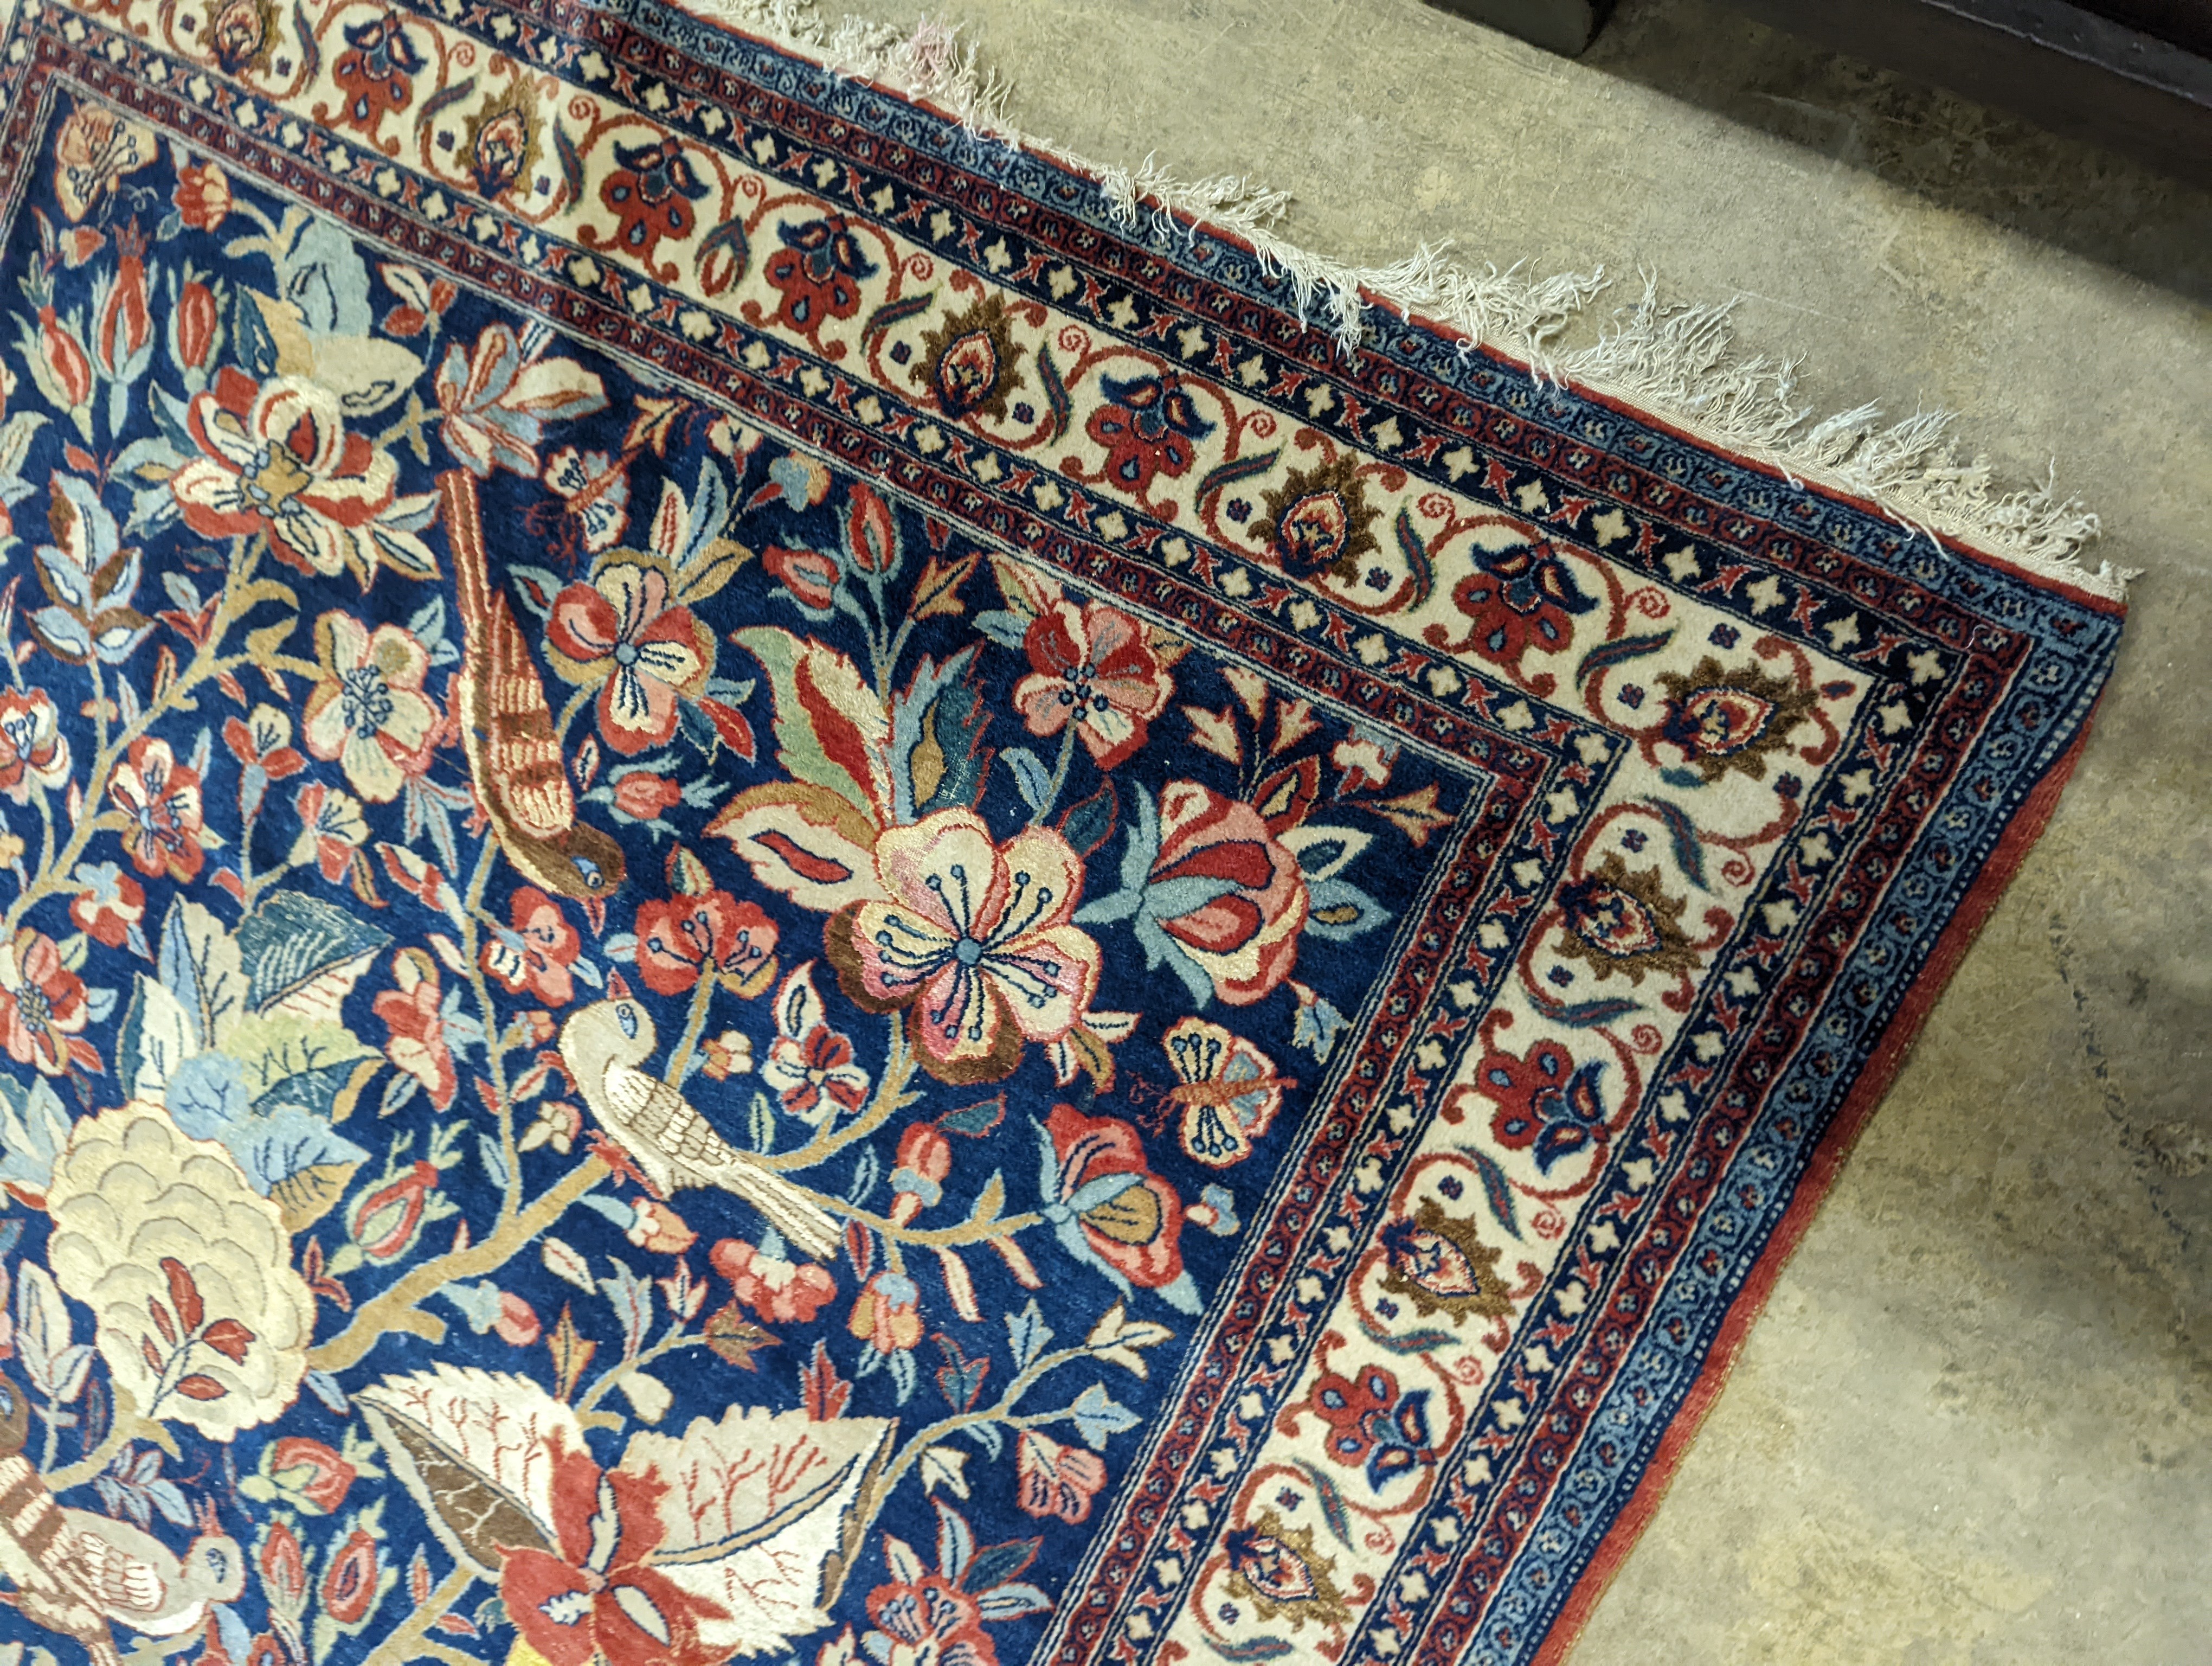 A Kirman blue ground rug woven with birds amongst flowering branches, 205 x 136cm